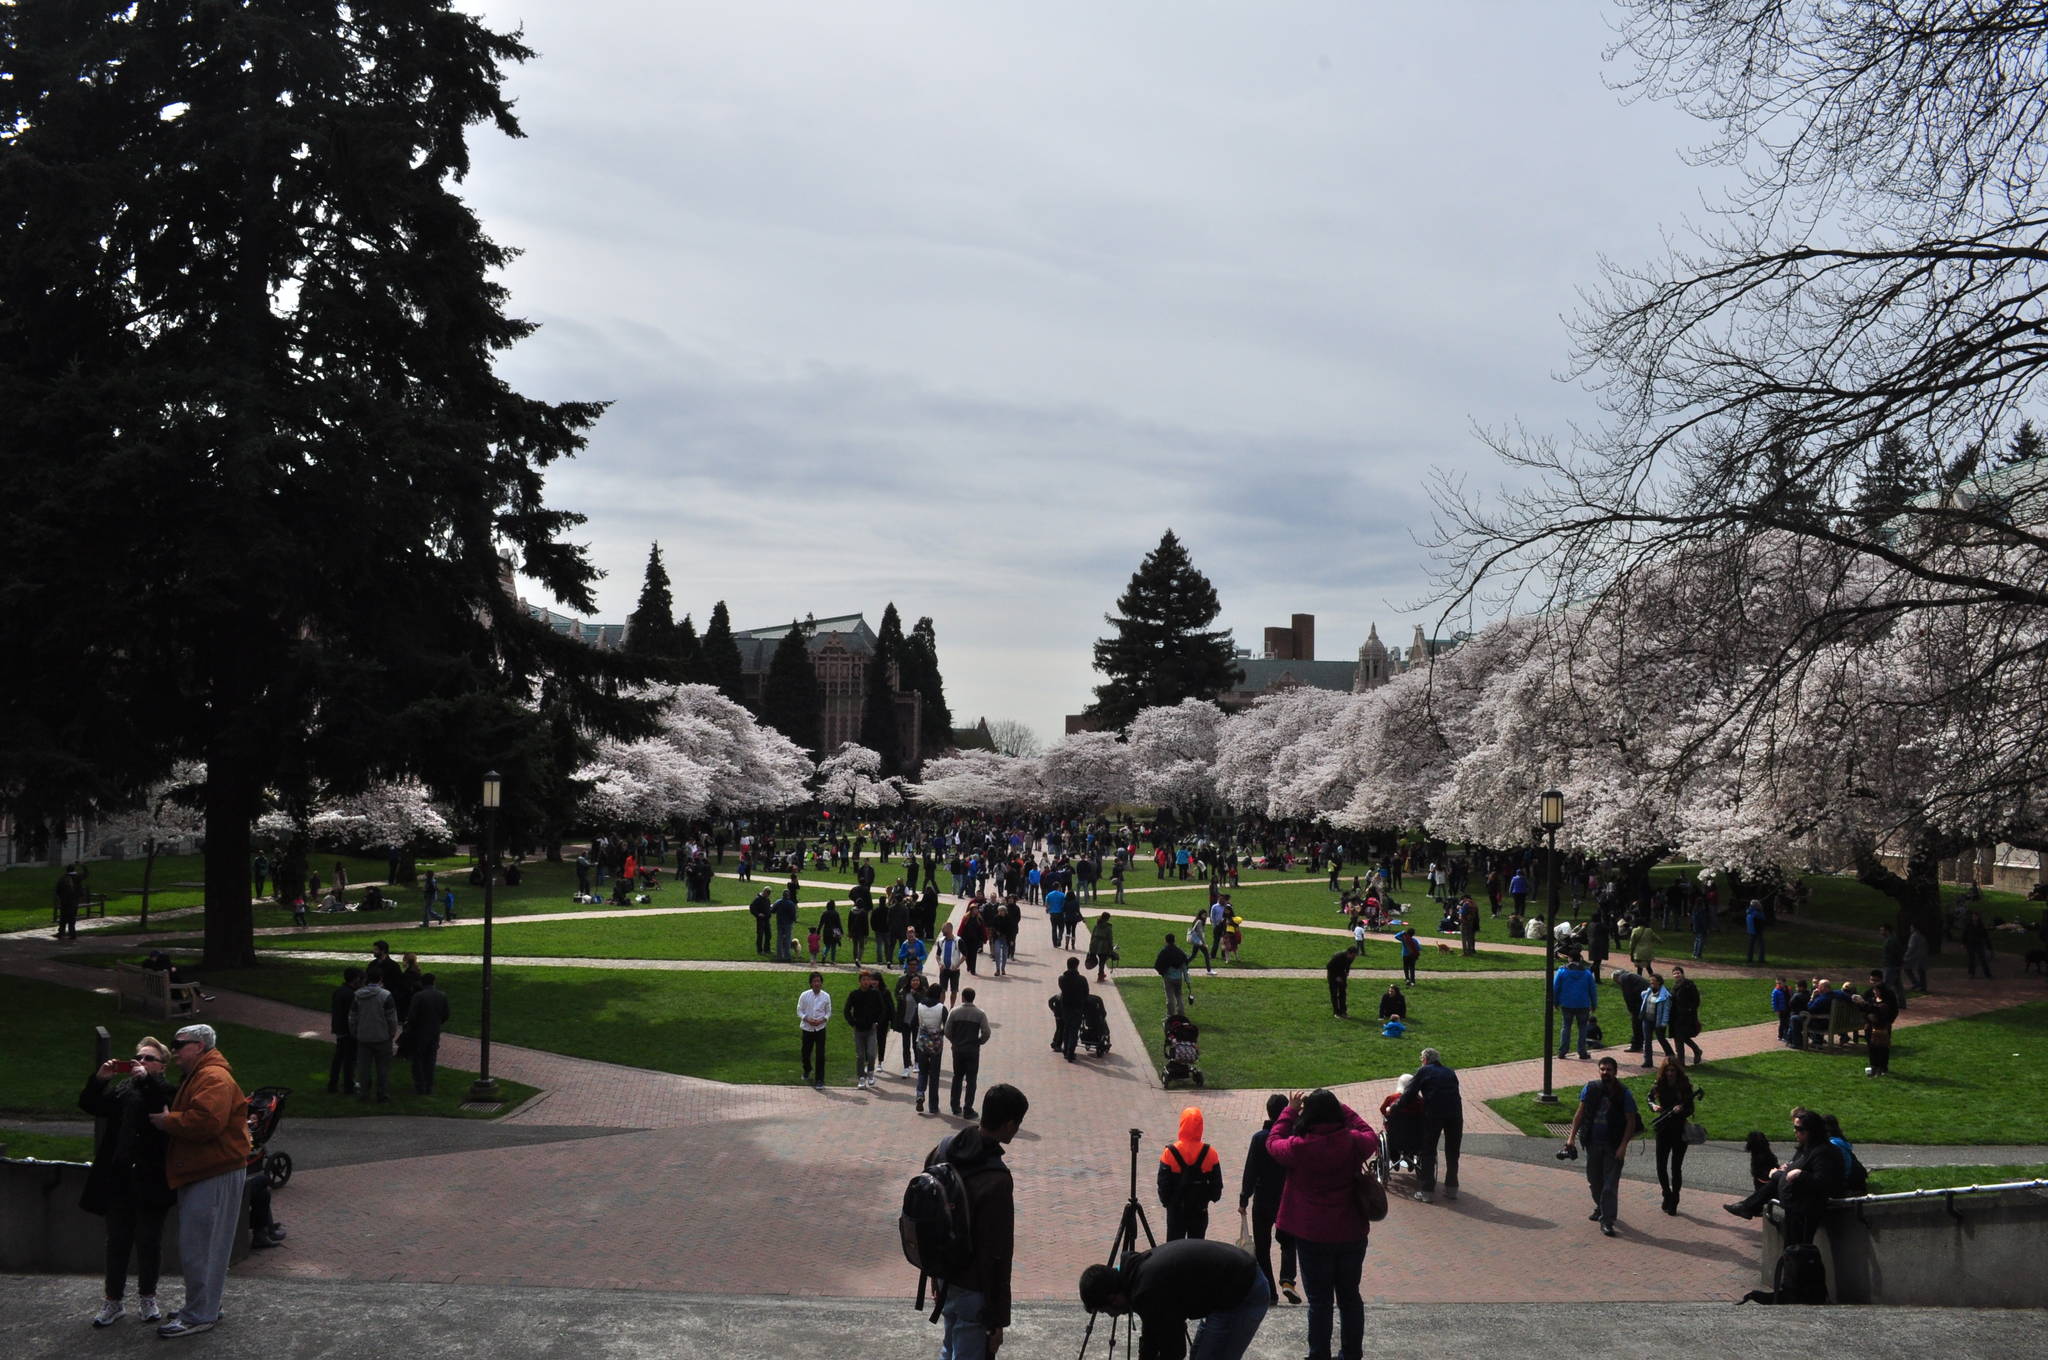 UW’s campus may be getting bigger. Photo by Joe Mabel/Flickr